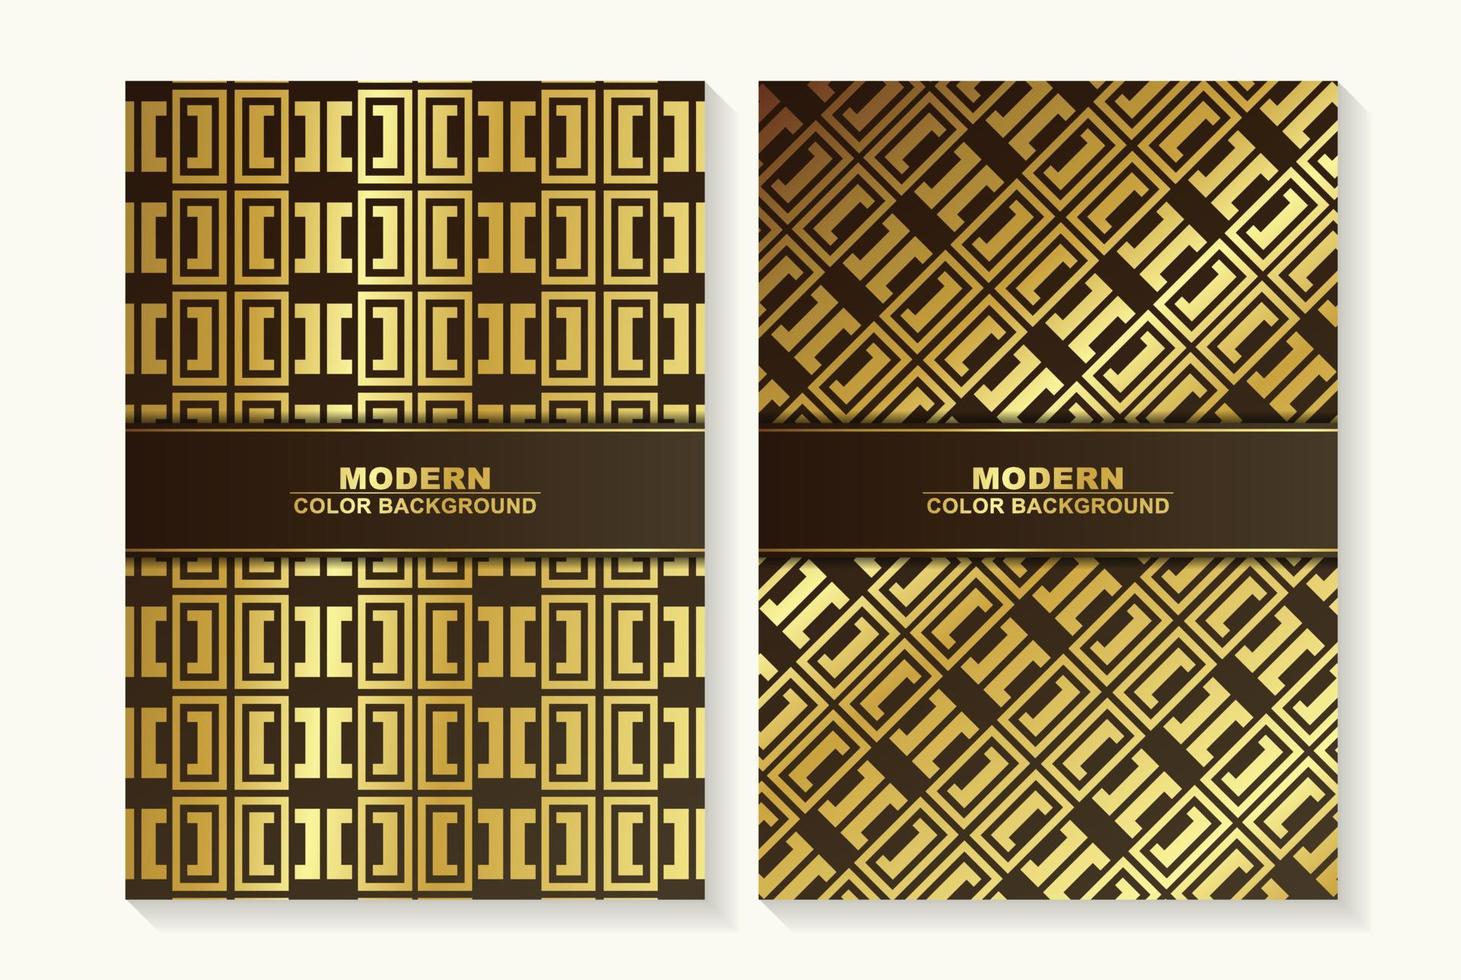 Minimal Cover in Gold. Vector Geometric Abstract Poster Design.